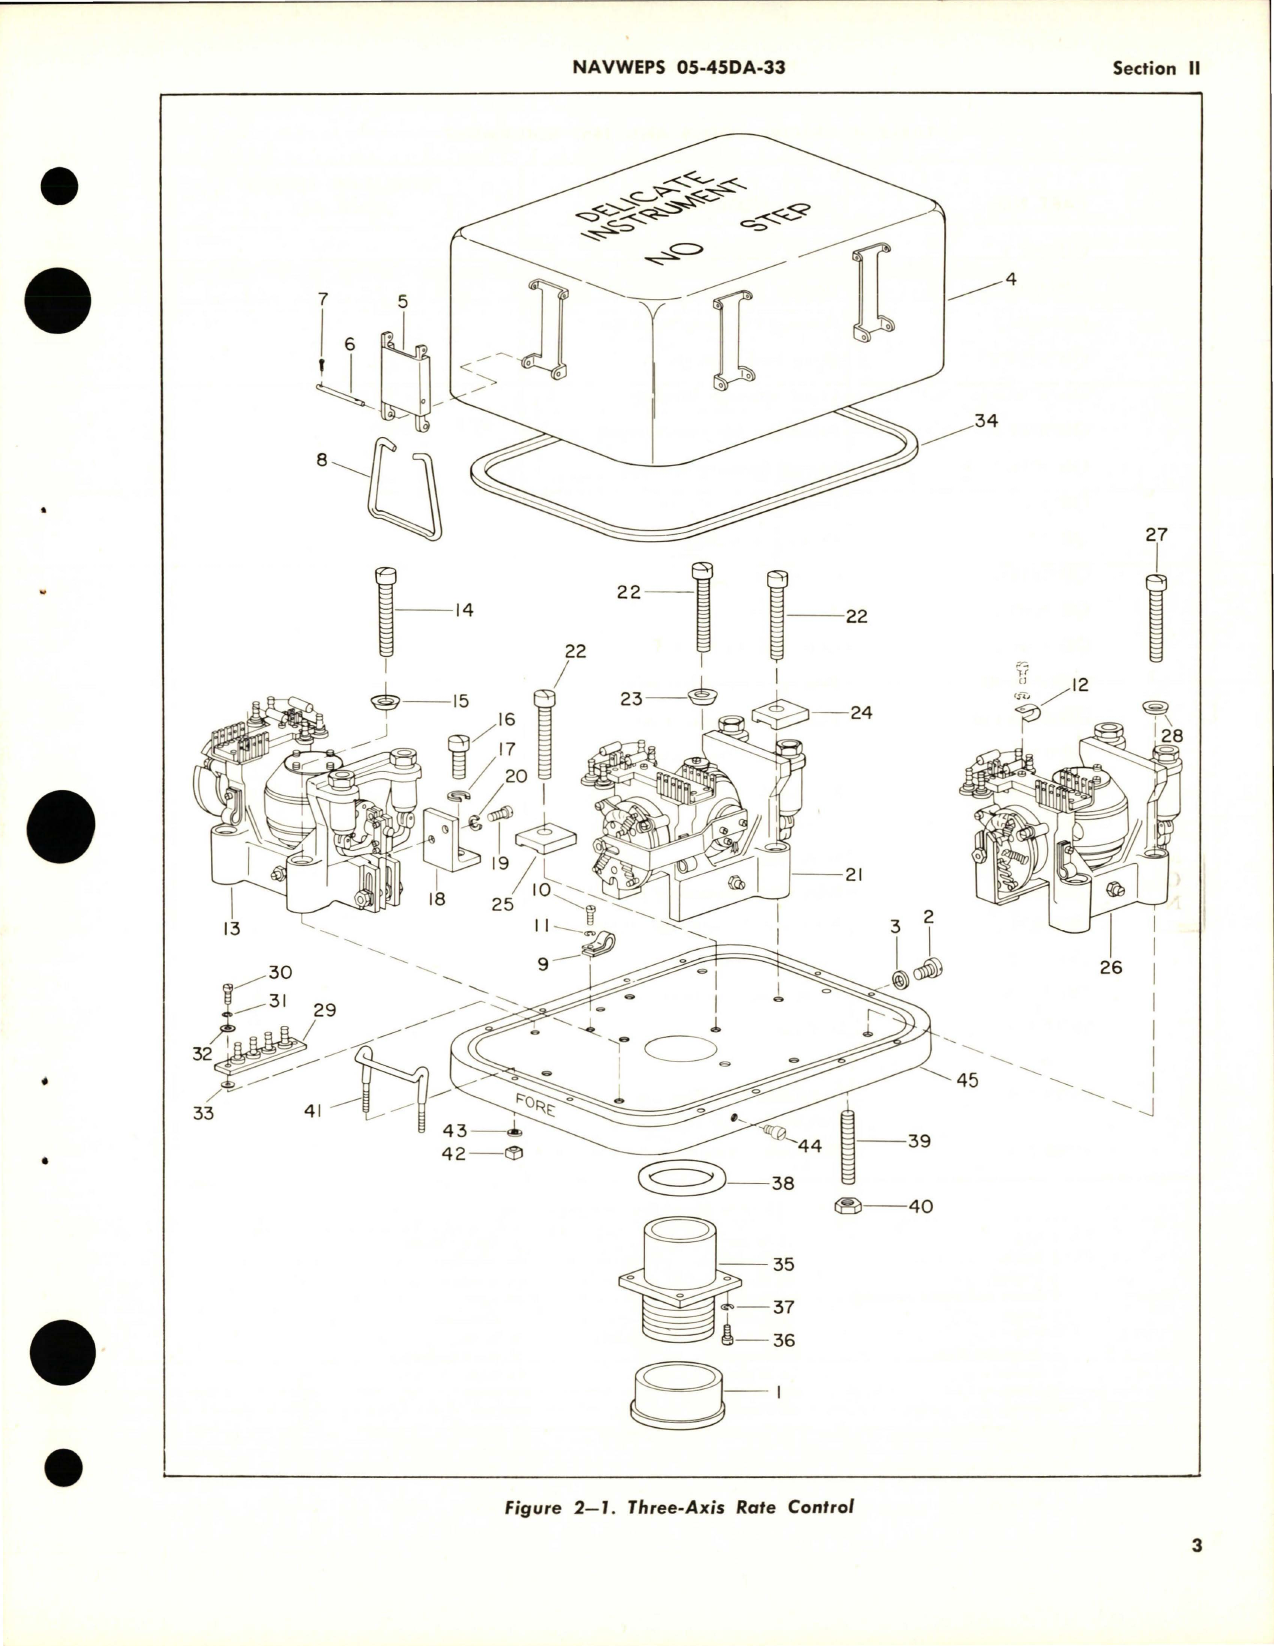 Sample page 7 from AirCorps Library document: Overhaul Instructions for Three Axis Rate Control - Parts 15822-3-A and 15822-3-B